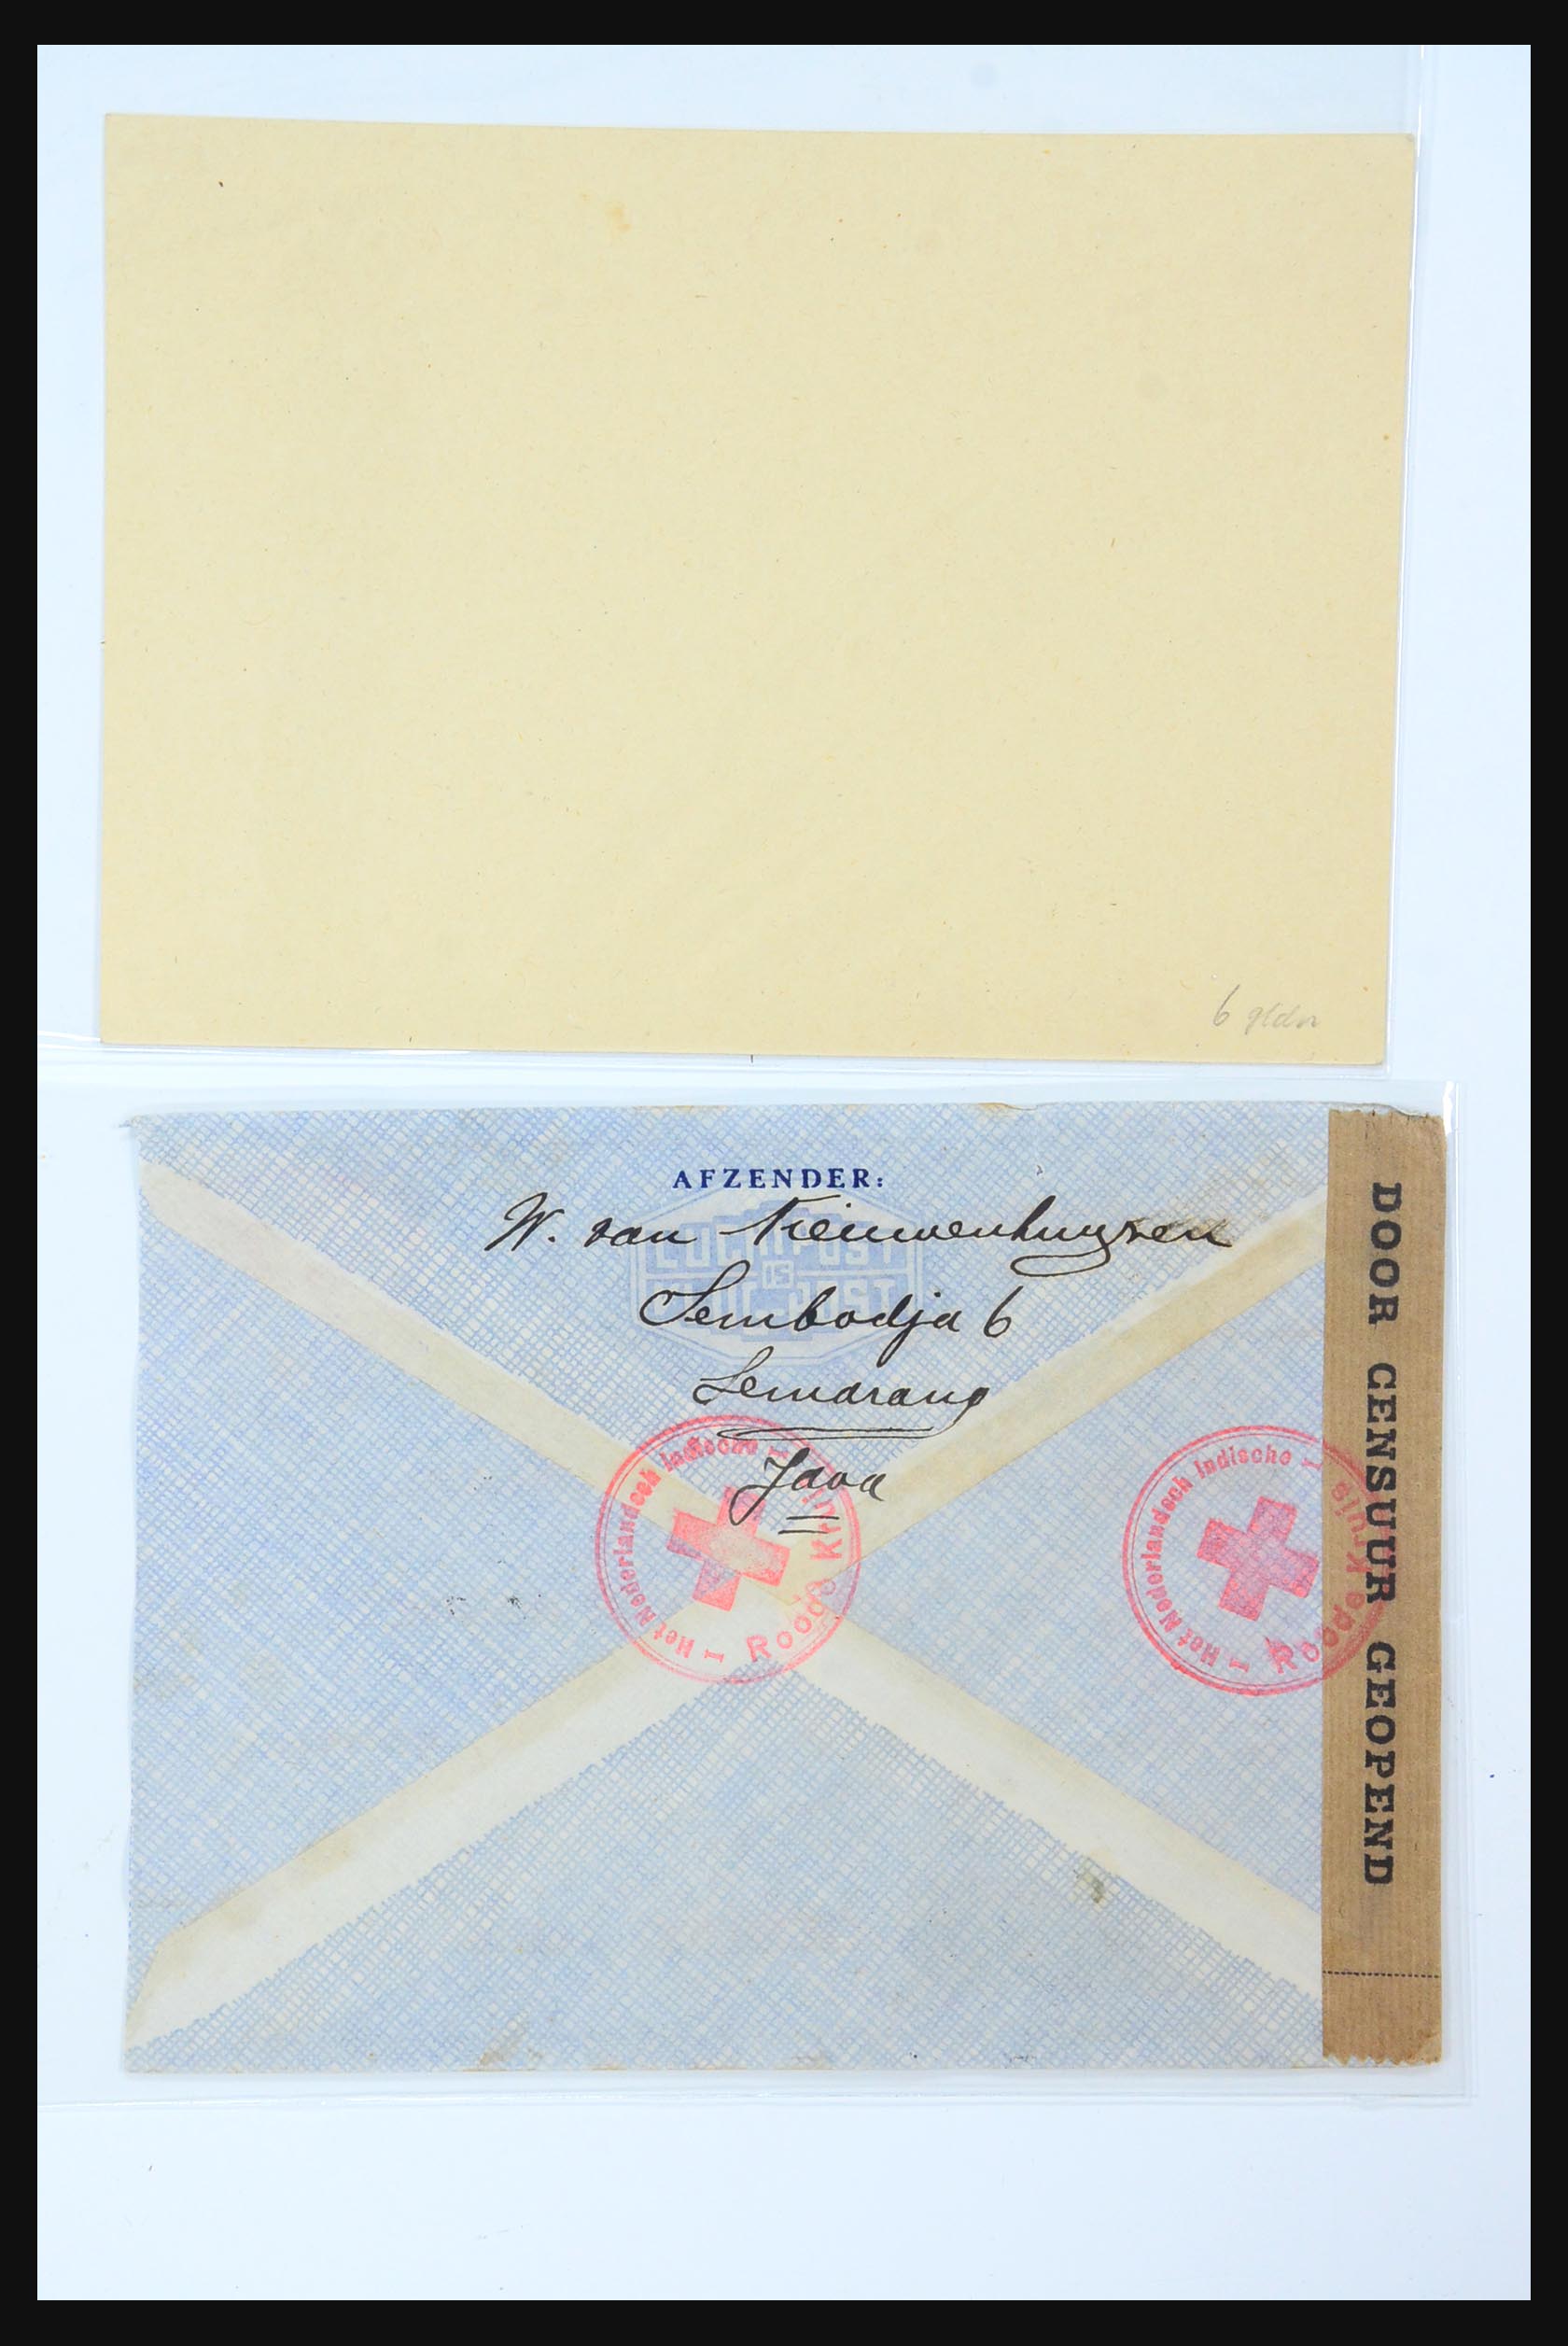 31362 071 - 31362 Netherlands Indies Japanese occupation covers 1942-1945.